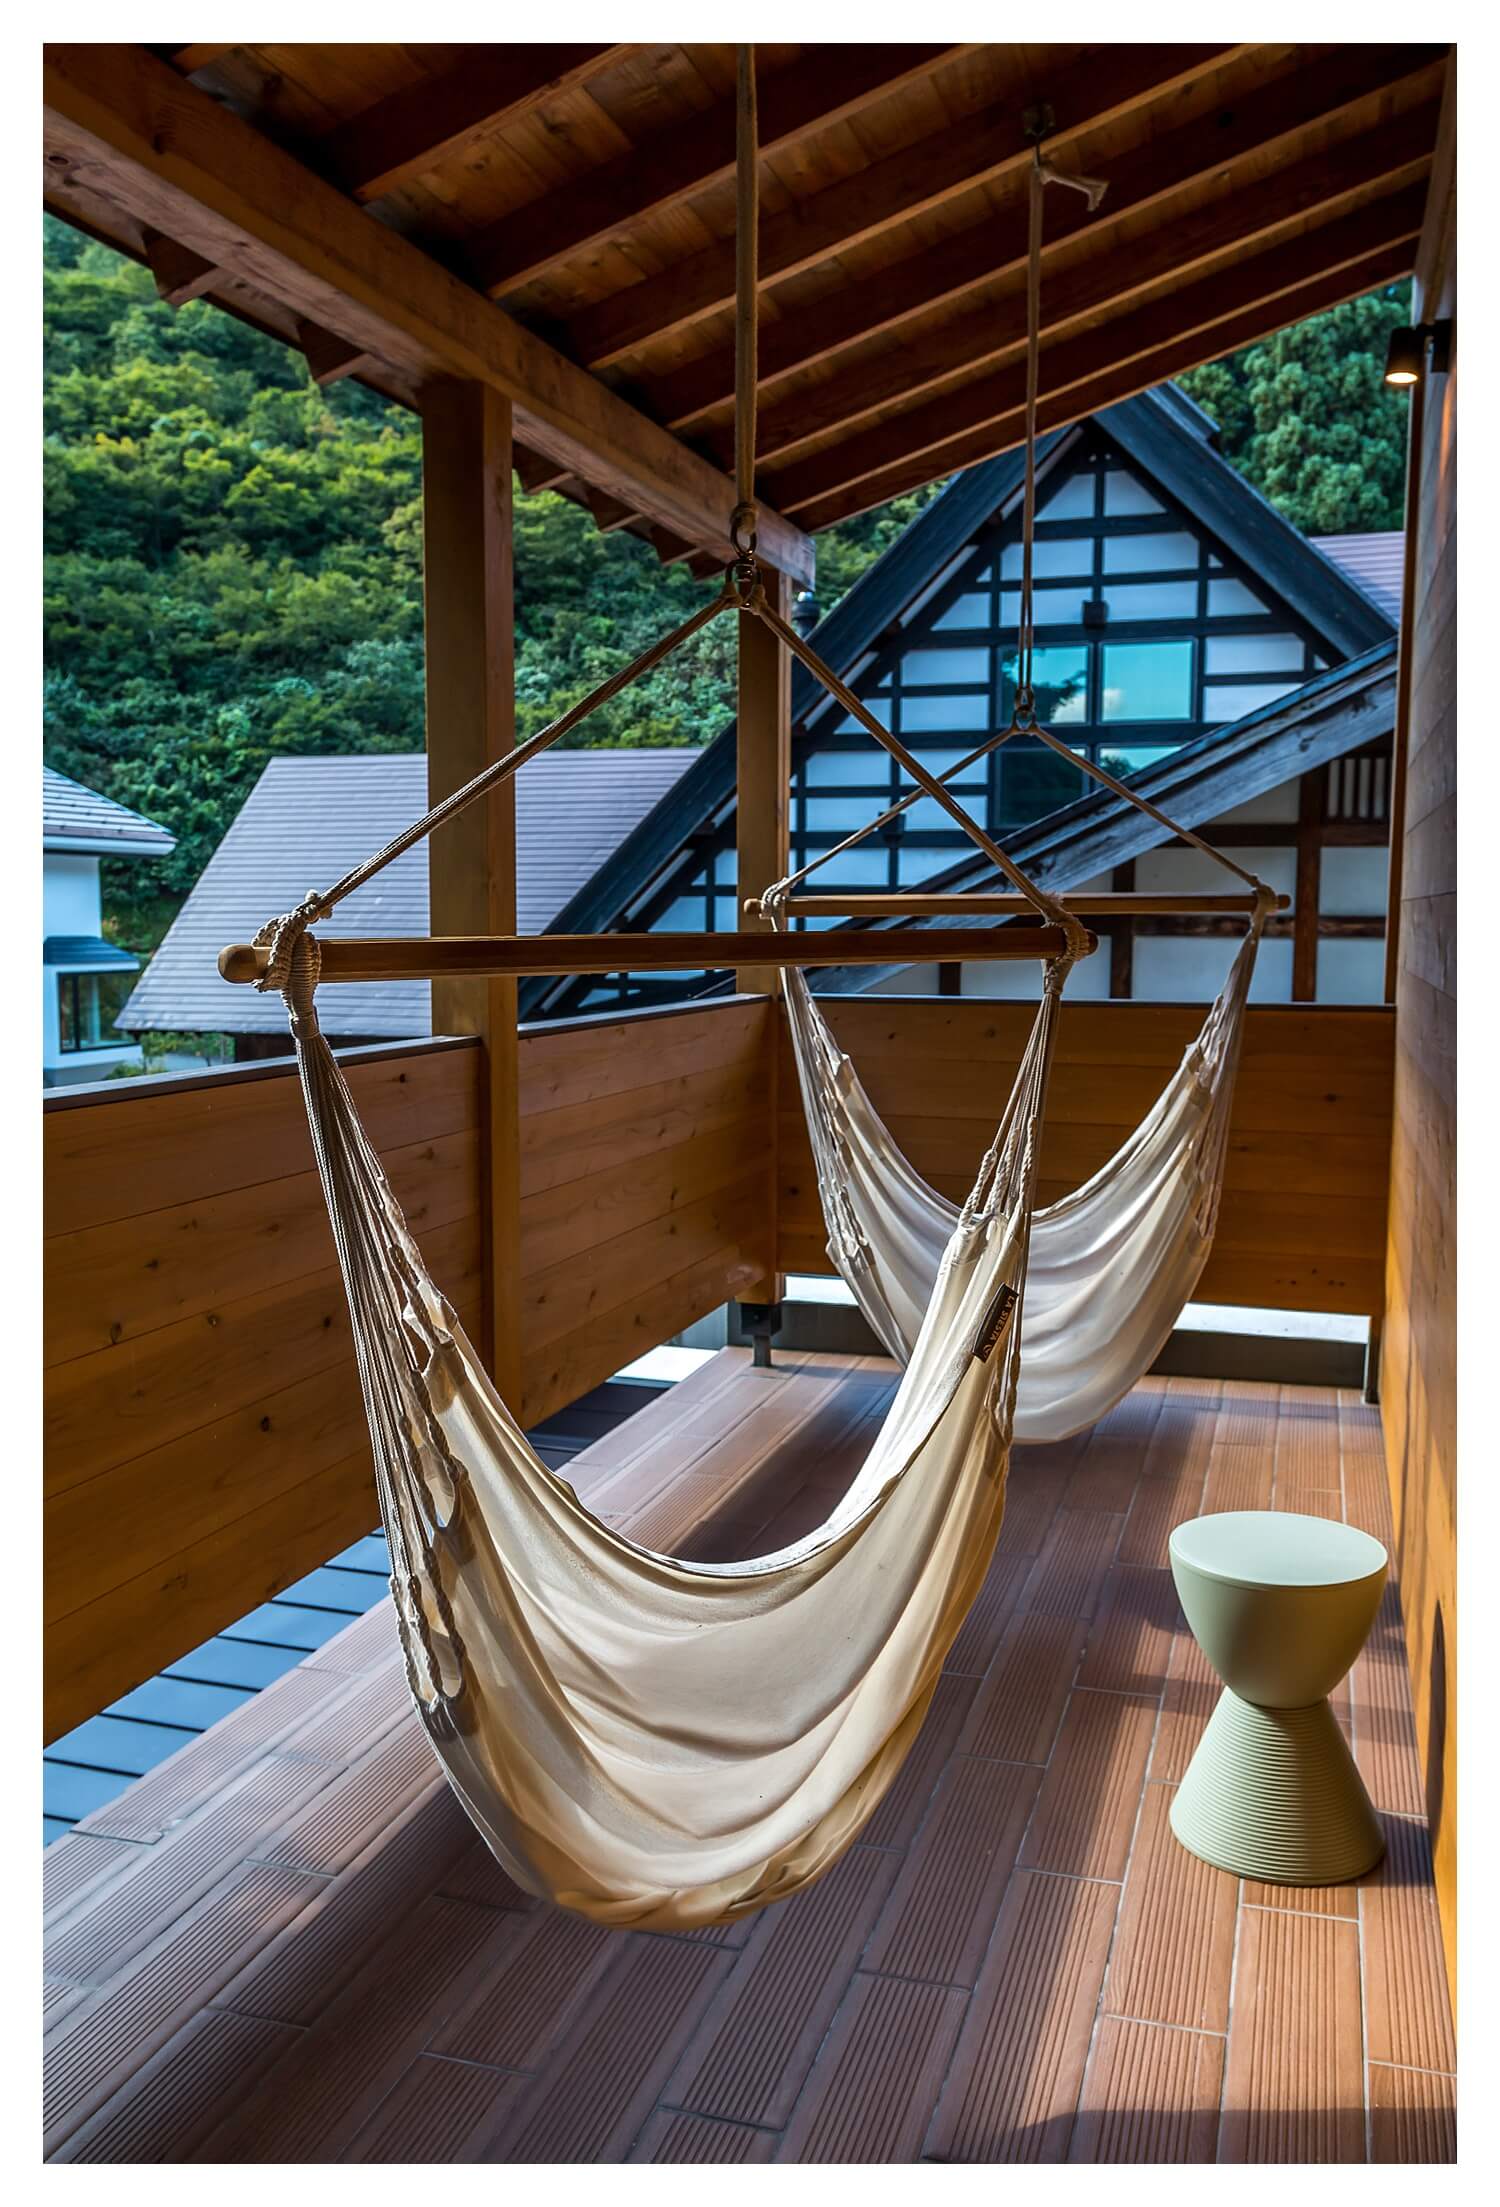  Traditional meets modern - This luxury hotel is a beautiful ryokan with the most amazing onsen. It’s only 2 hours away from Tokyo! | Japan, photography diary , landscape 